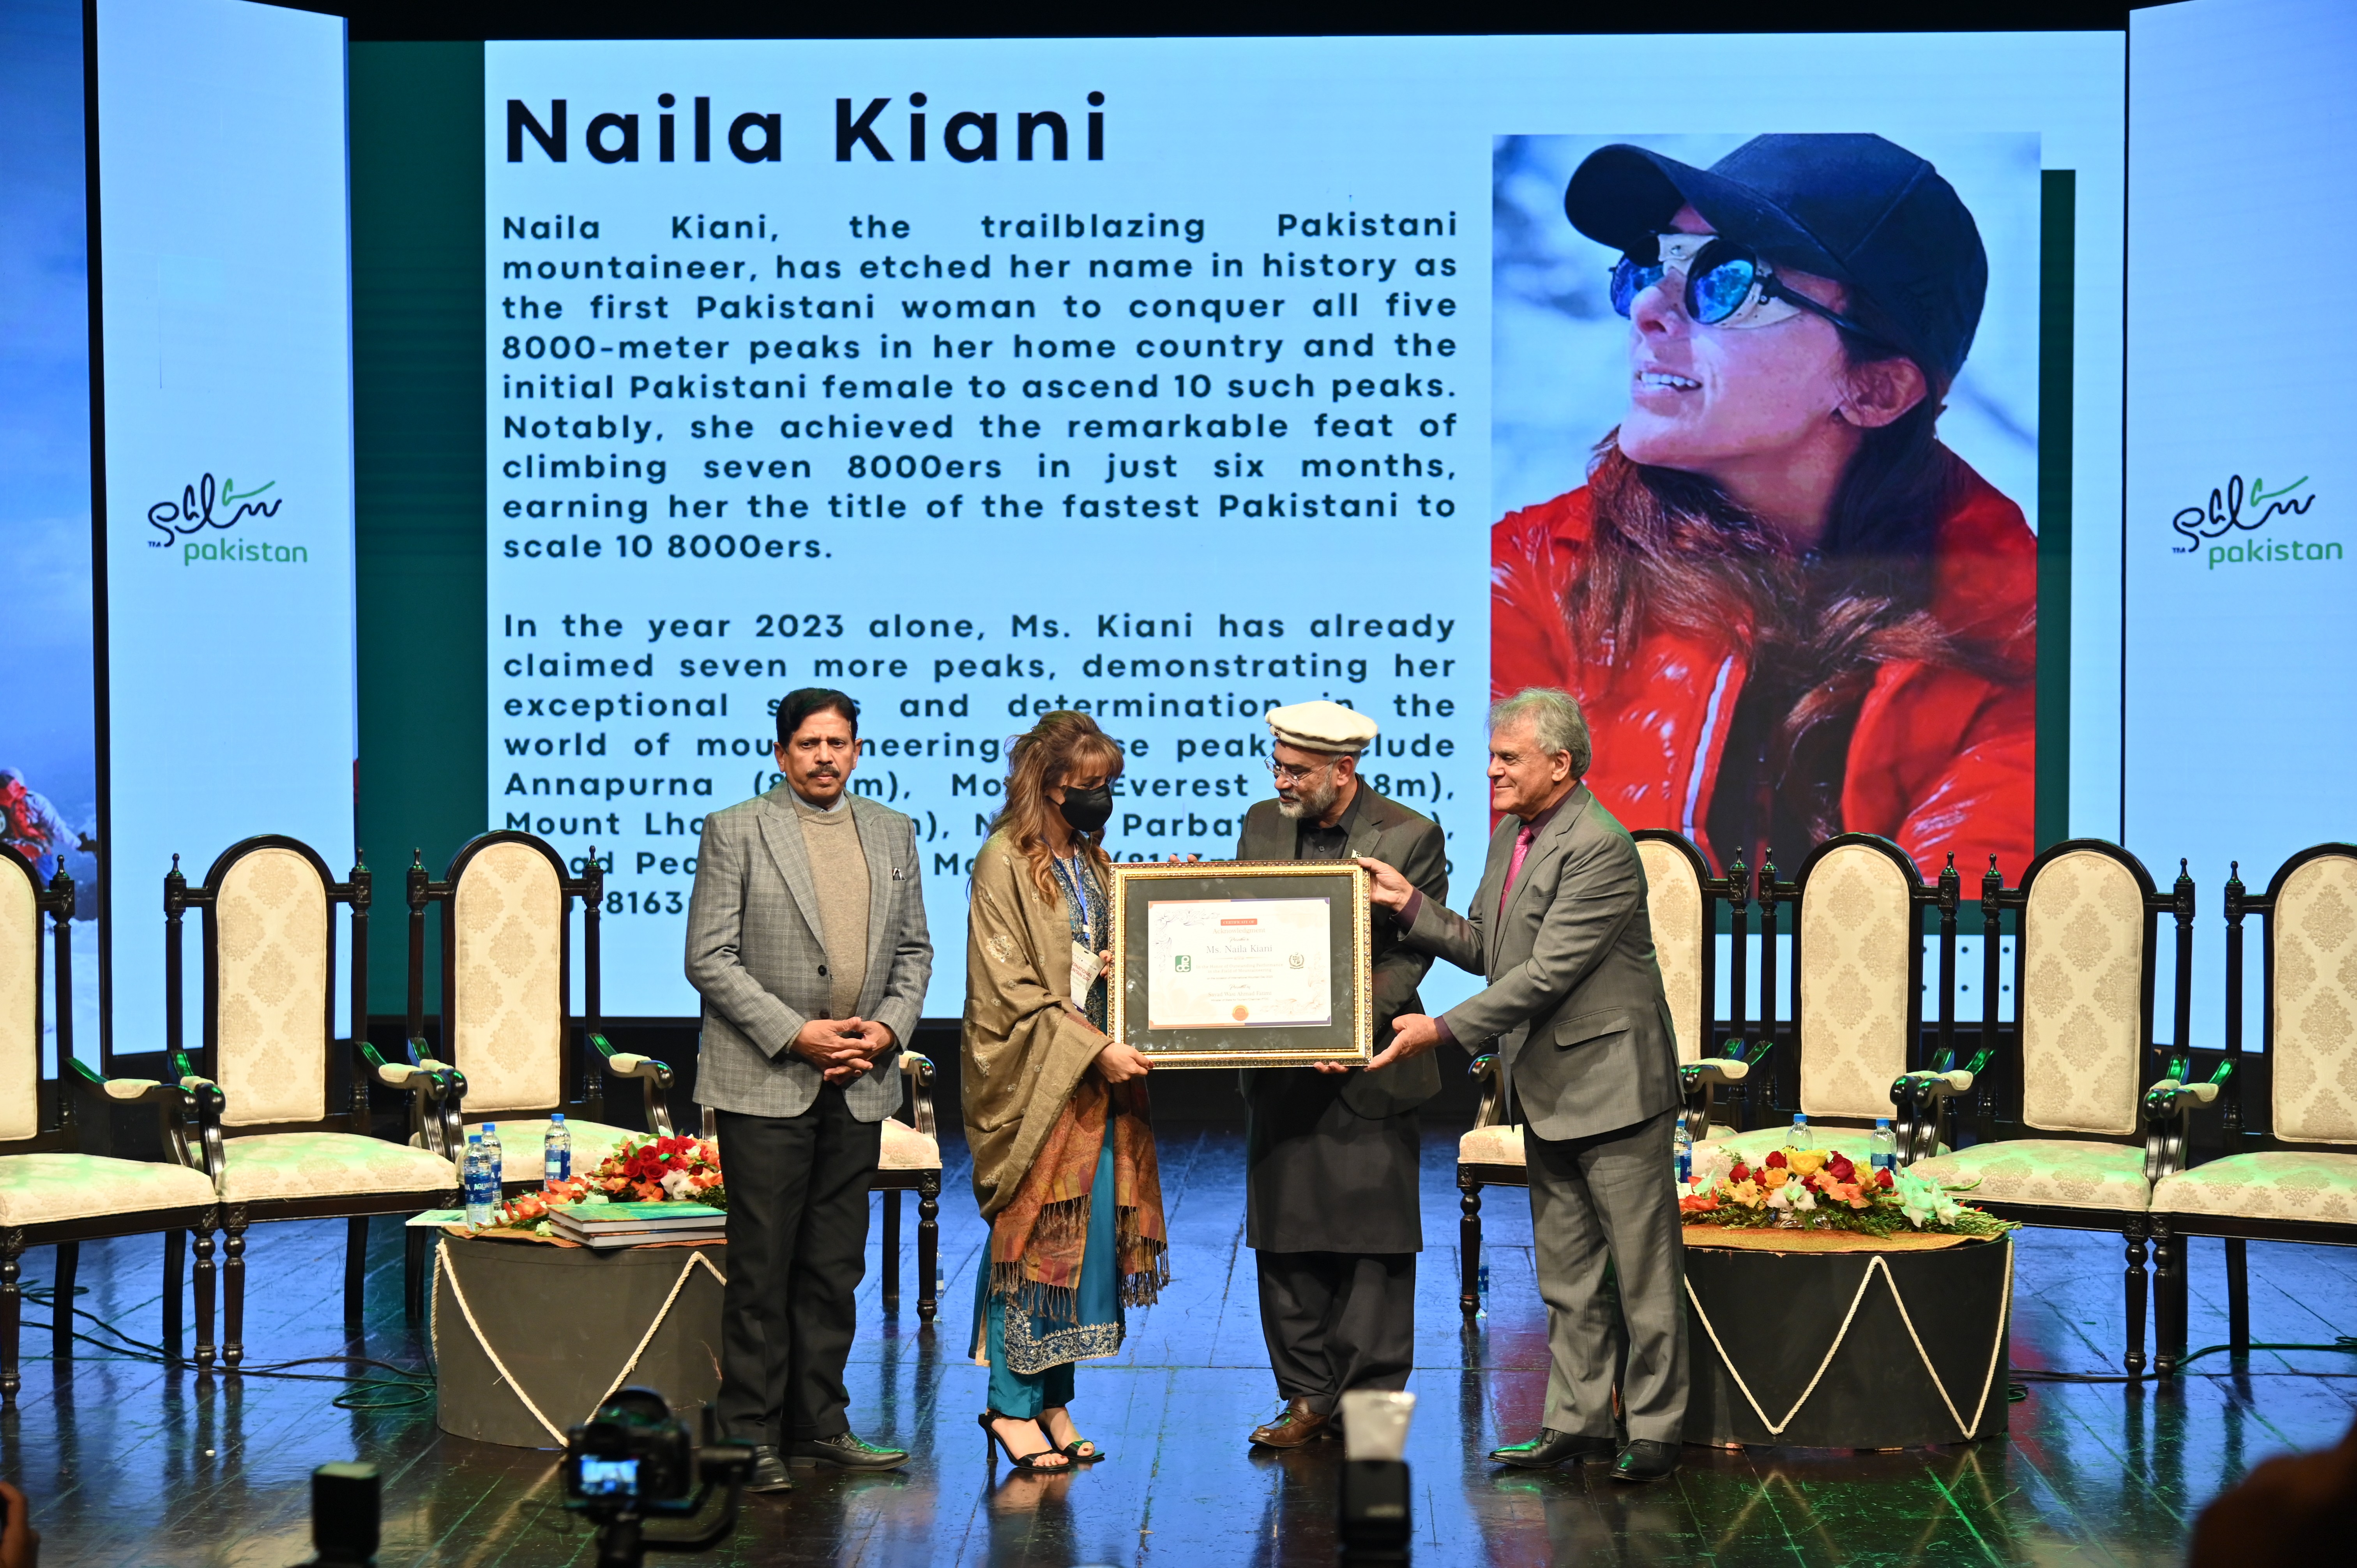 The certificate of acknowledgment presented to Ms. Naila Kiani, a Pakistani high-altitude mountaineer. She is the first Pakistani woman mountaineer to climb 10 of the 14 eight-thousanders